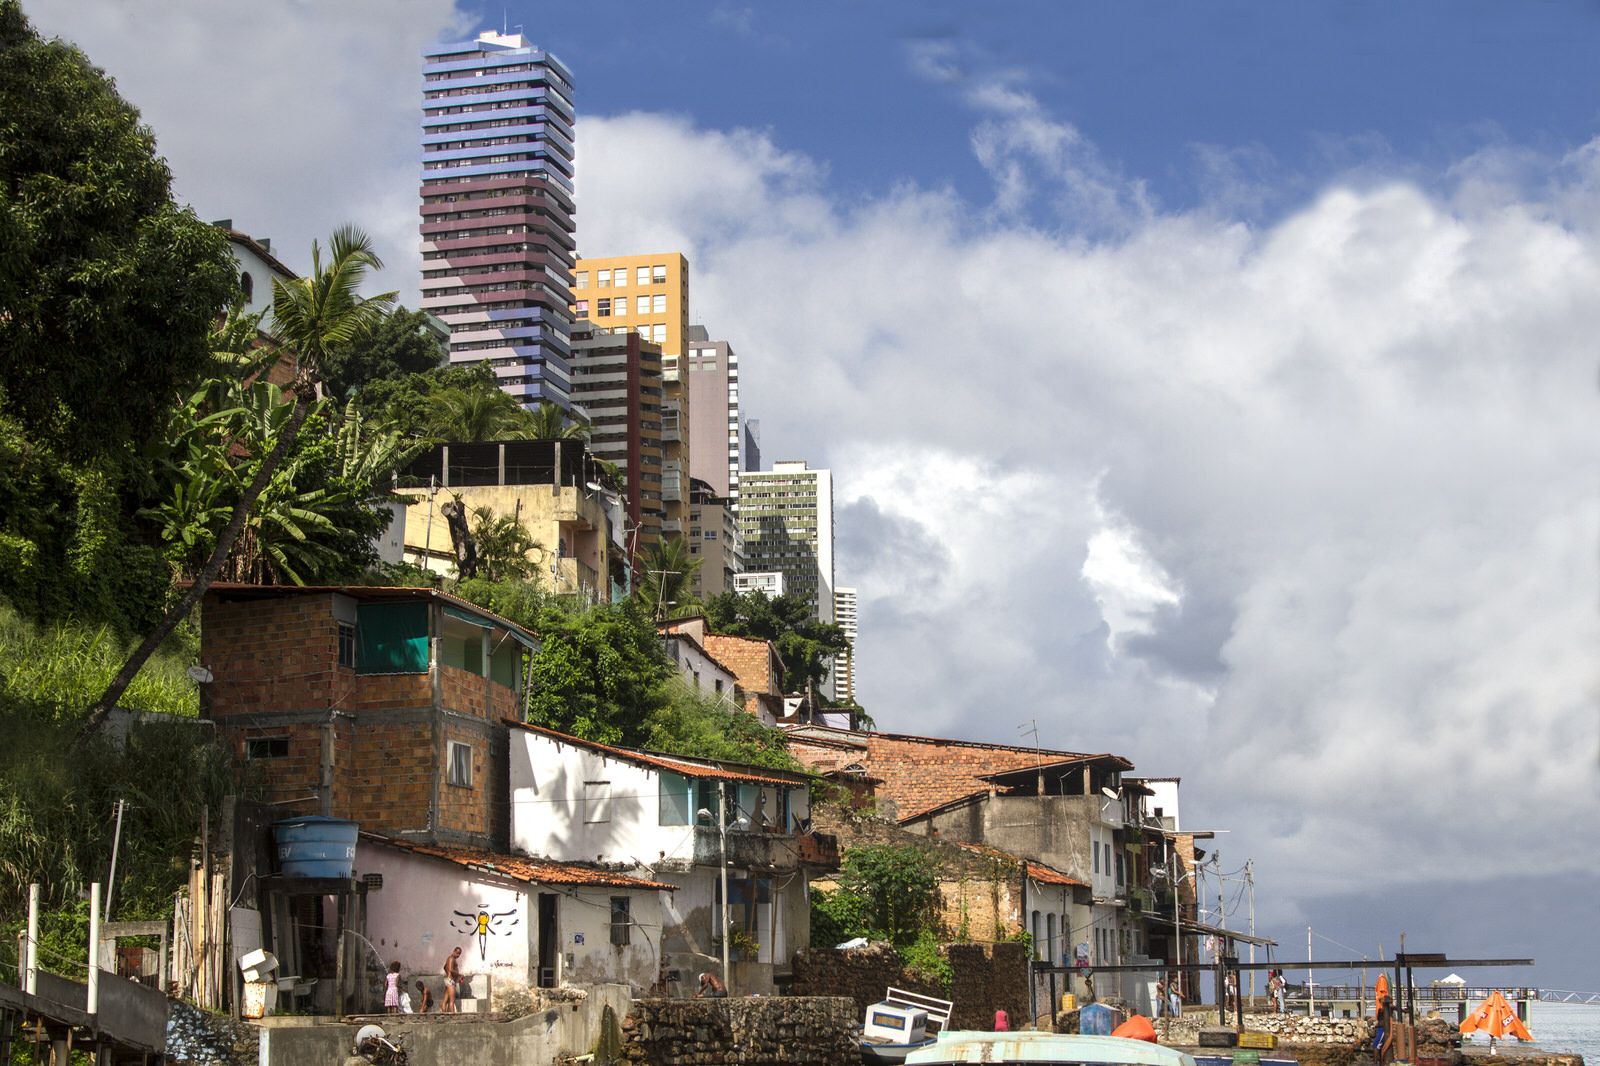  Luxury high-rise blocks overlook Gamboa de Baixo. This community has been segregated partly because of the construction of the Avenue Contorno, a large motorway that seperates the community from the city. 